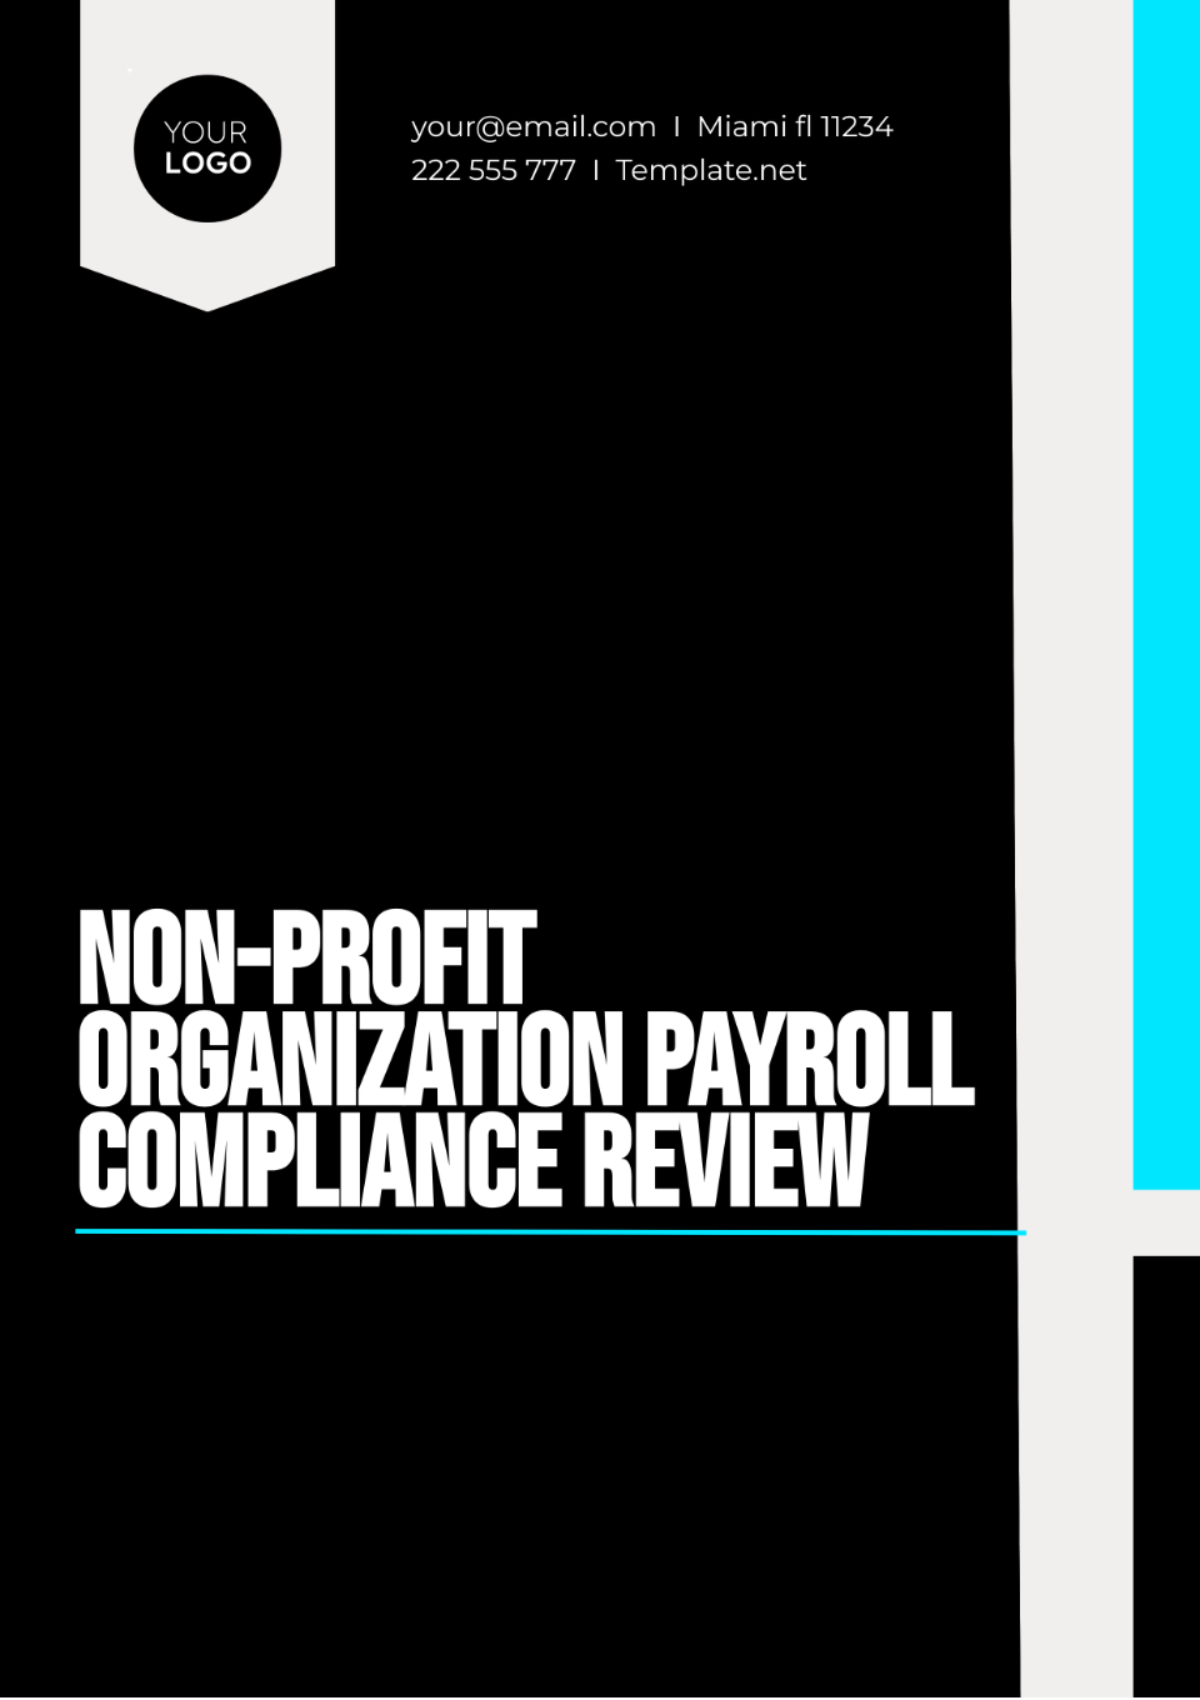 Non-Profit Organization Payroll Compliance Review Template